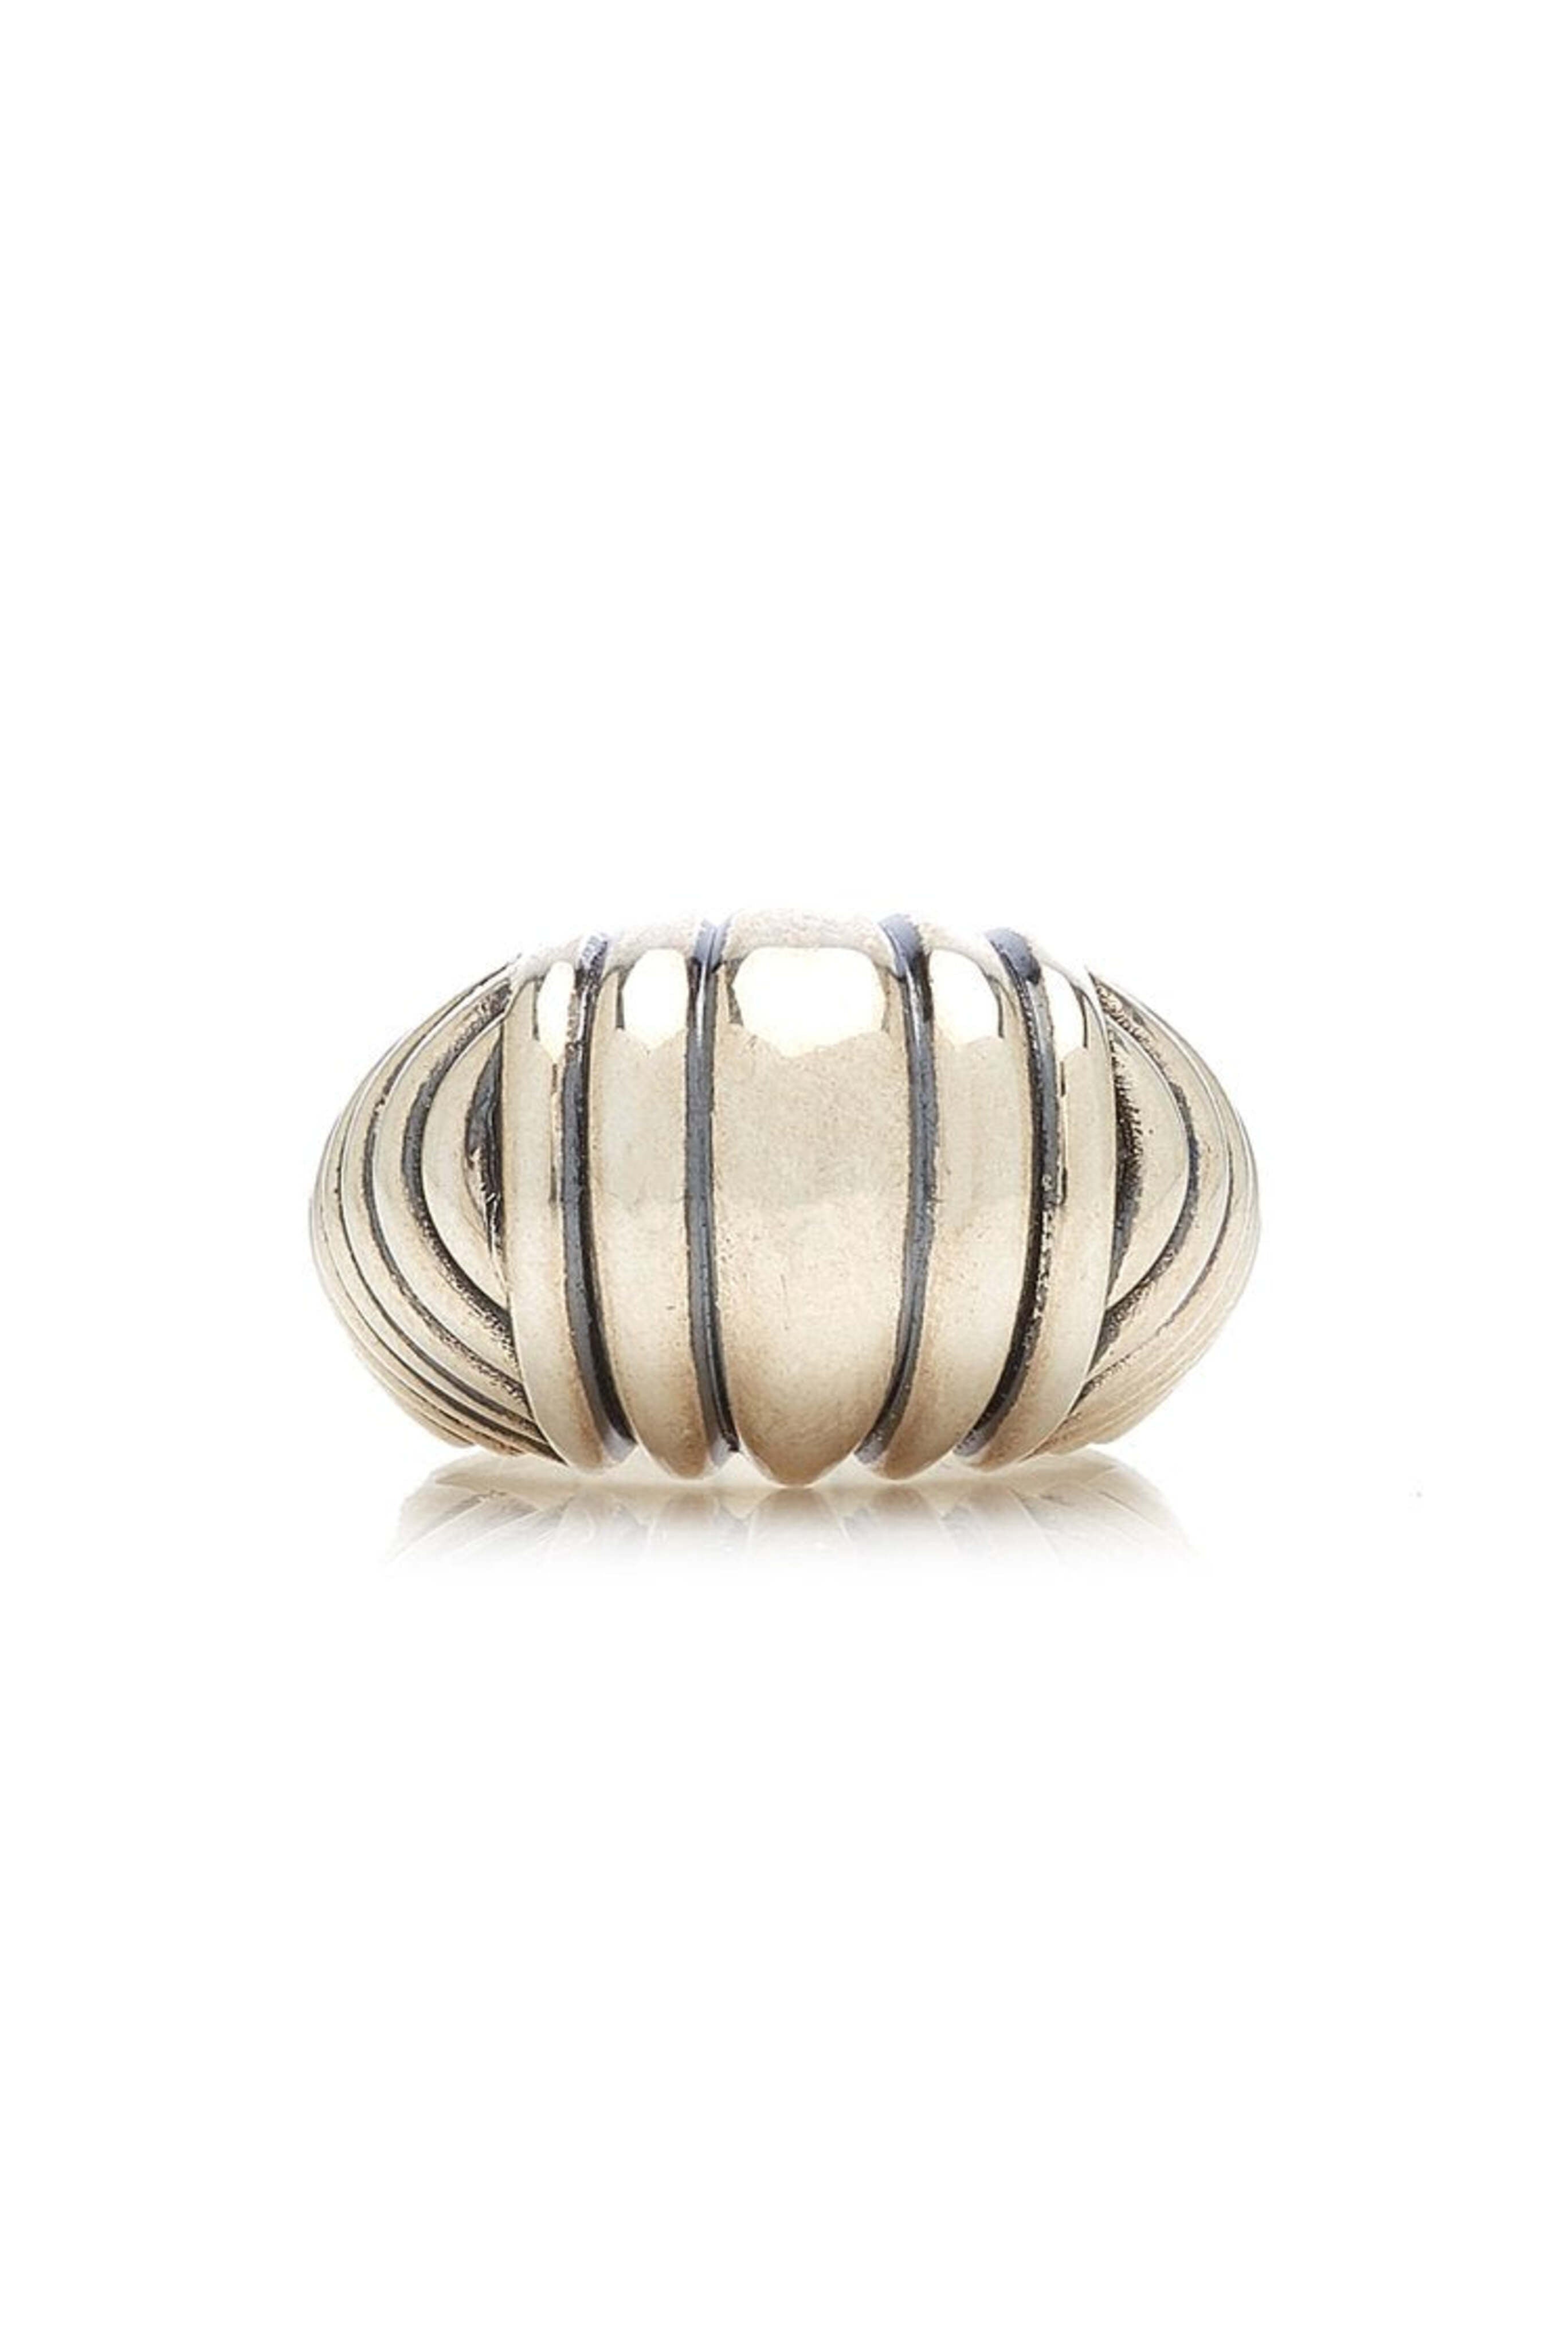 Blondeau Silver Ring